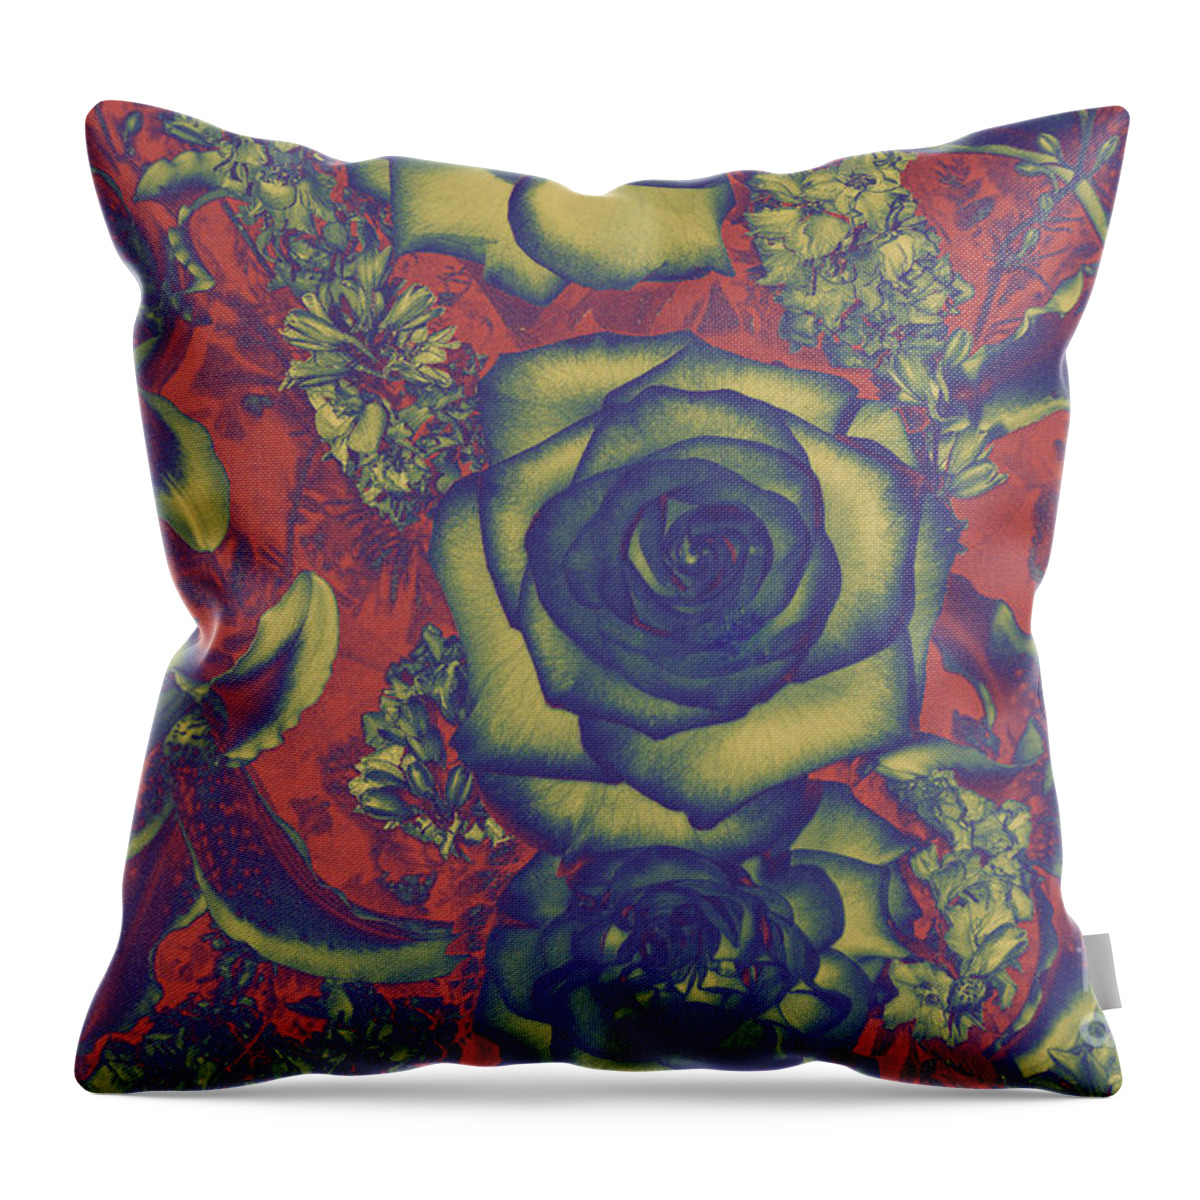 Abstract Landscape Photograph Of Roses And Other Flowers Throw Pillow featuring the photograph Metalic Rose by Mae Wertz